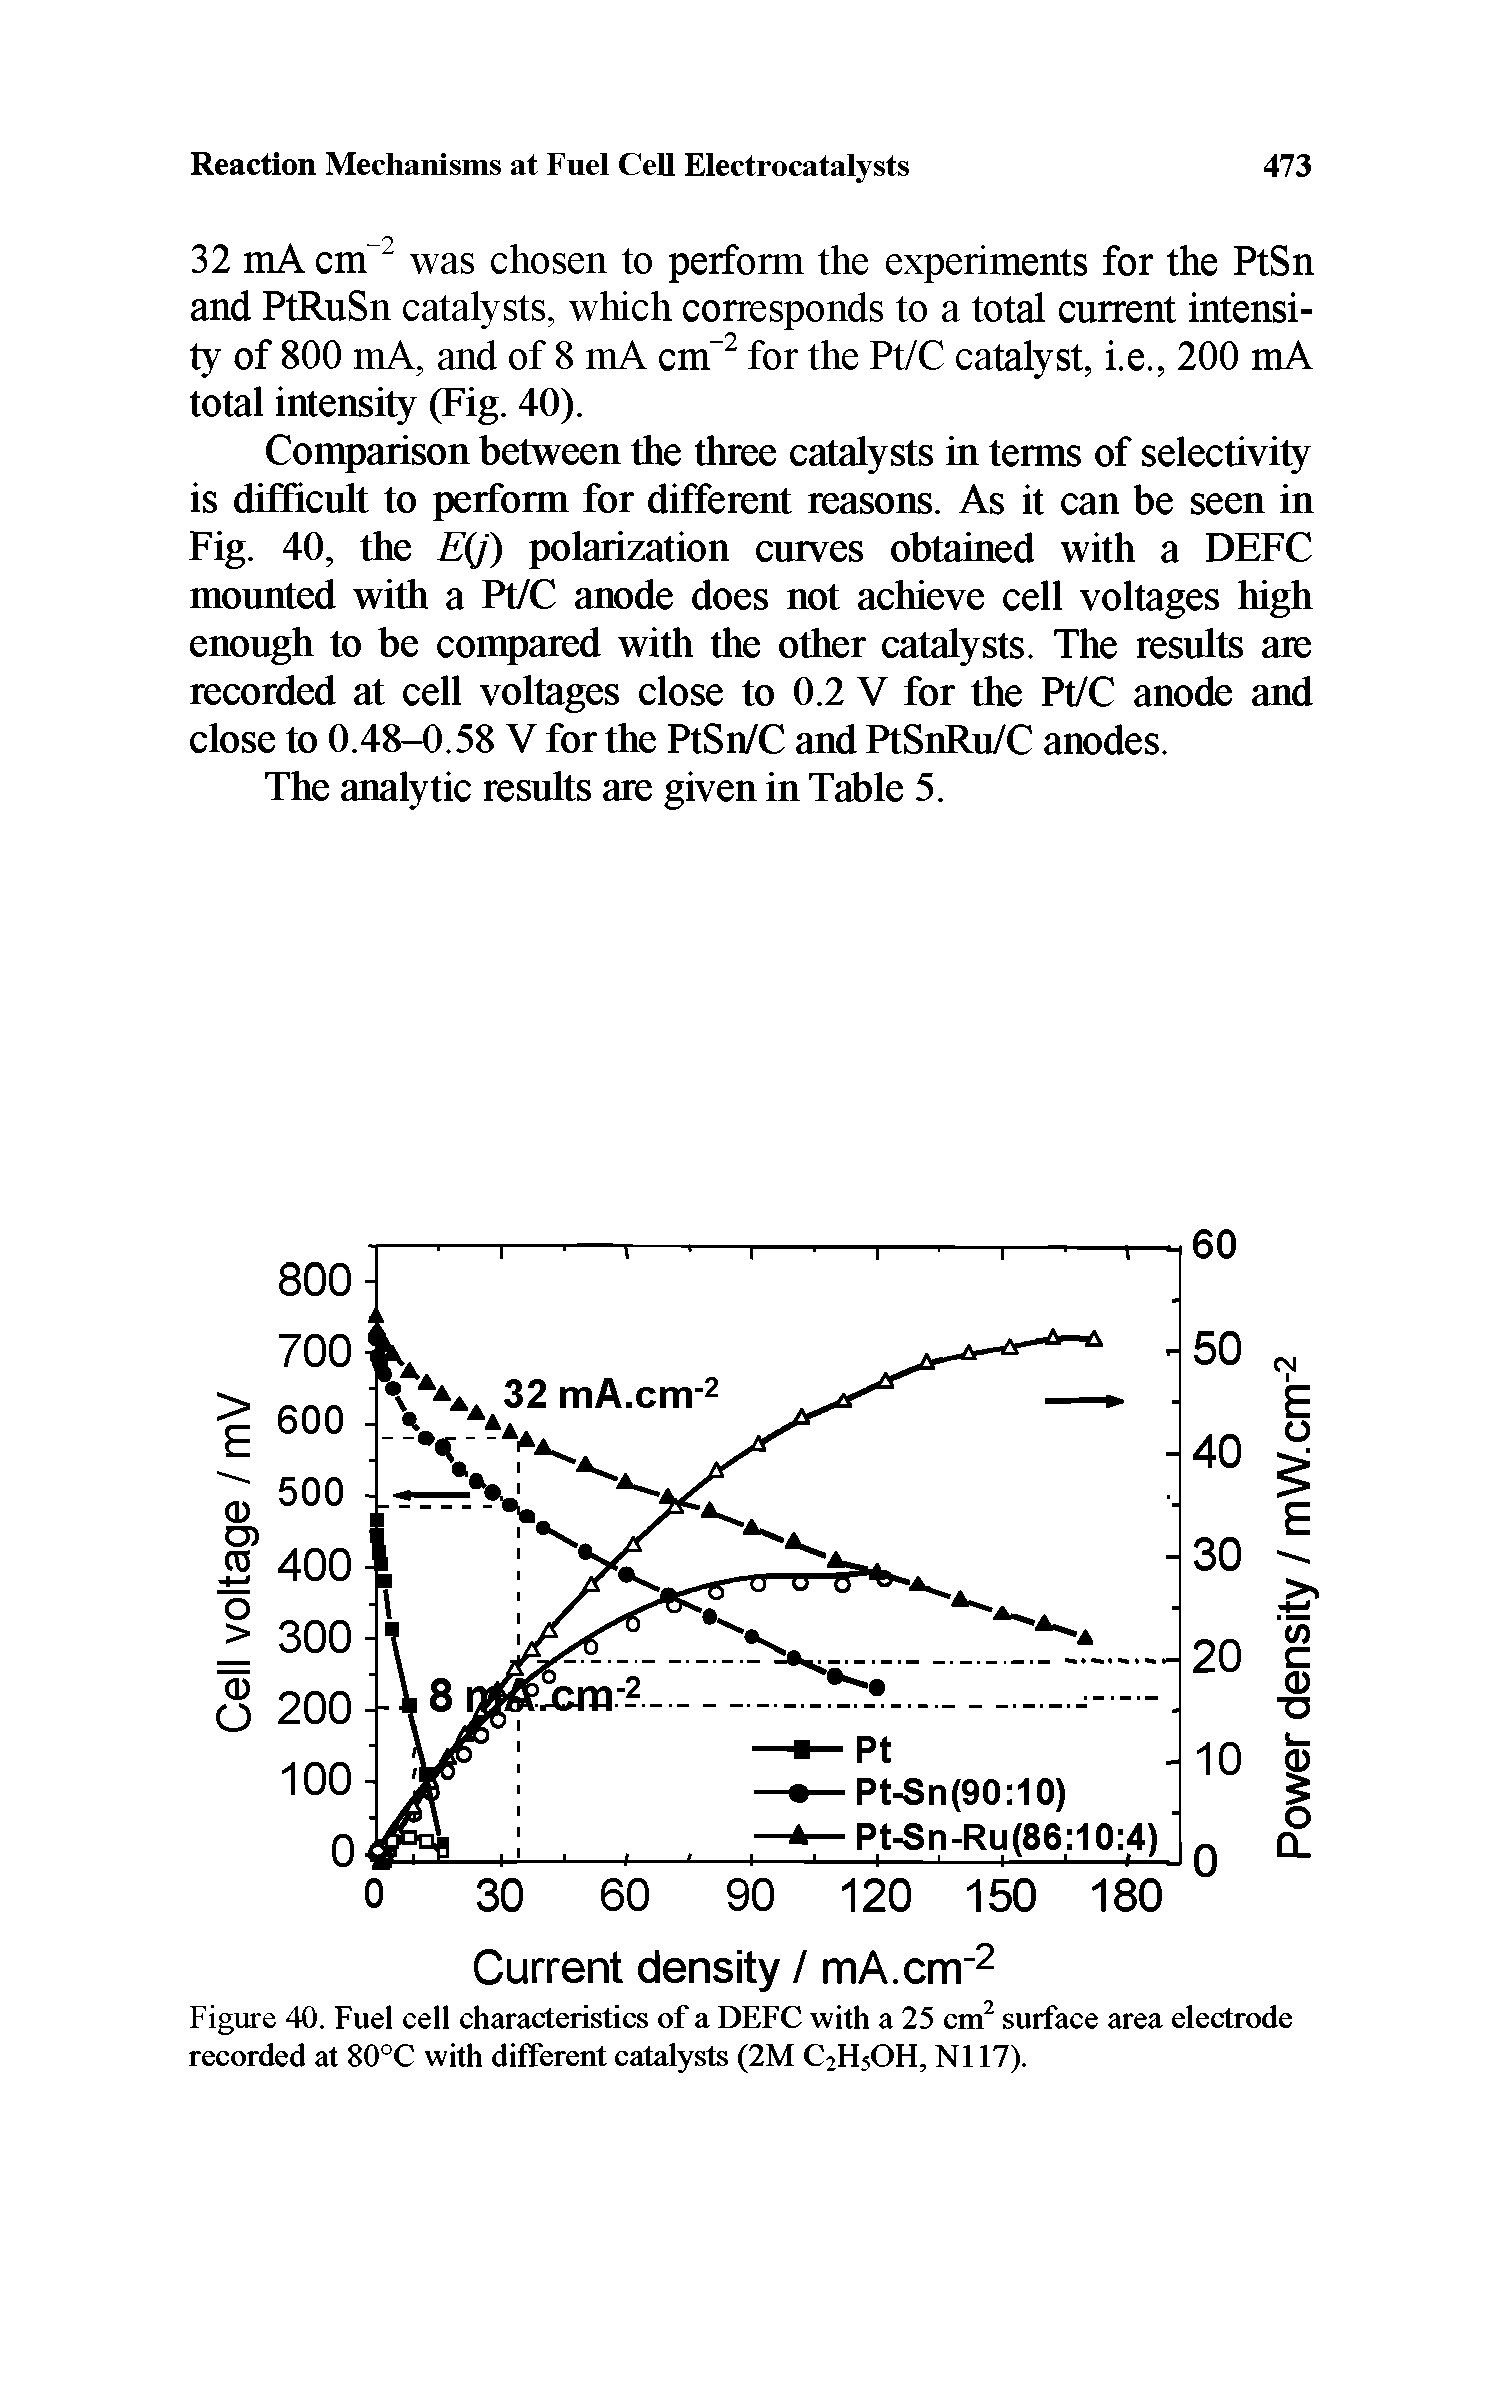 Figure 40. Fuel cell characteristics of a DEFC with a 25 cm surface area electrode recorded at 80°C with different catalysts (2M C2H5OH, N117).